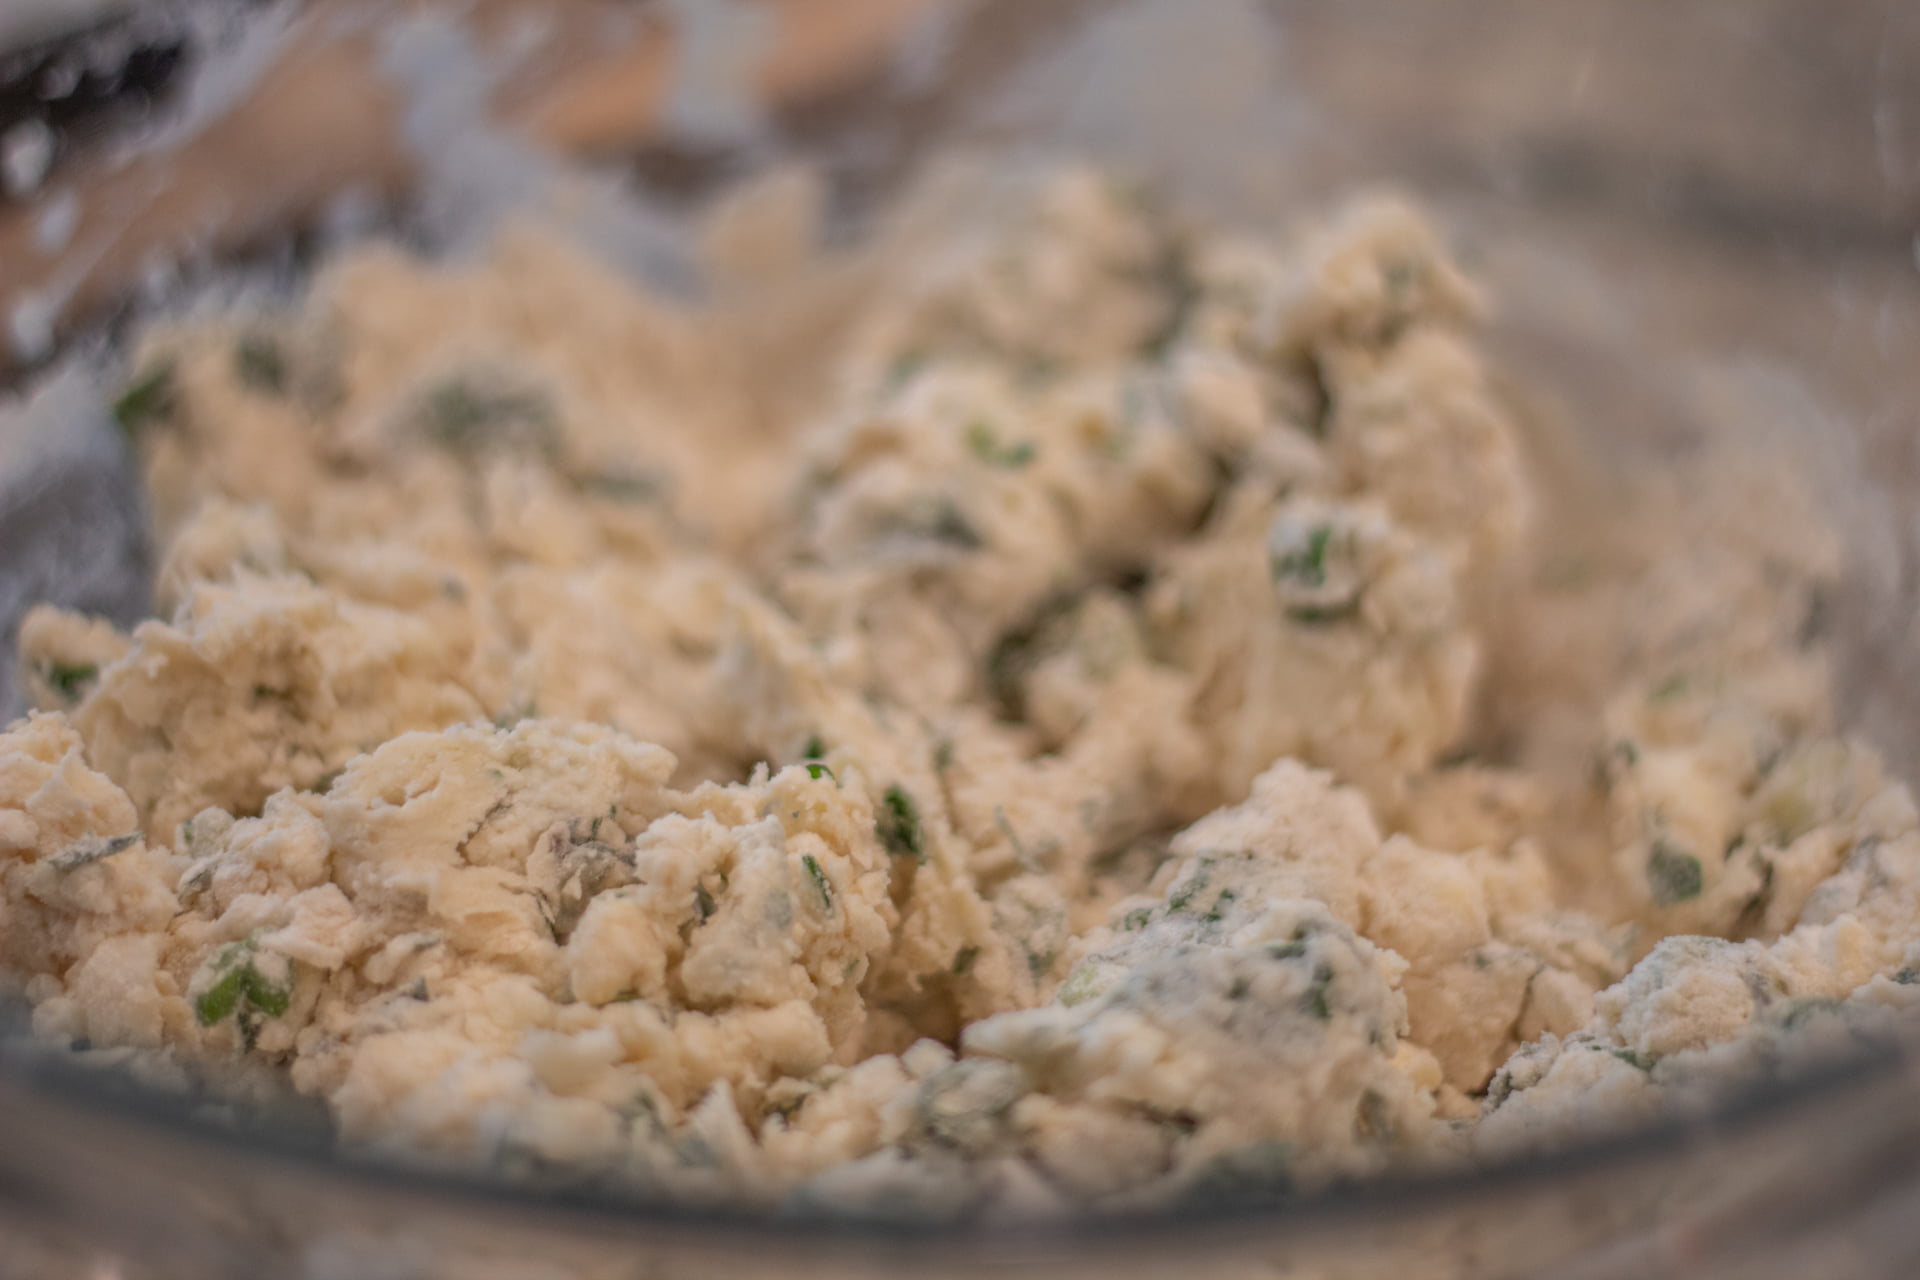 Dough mixture for Savory Ricotta Herb Scones